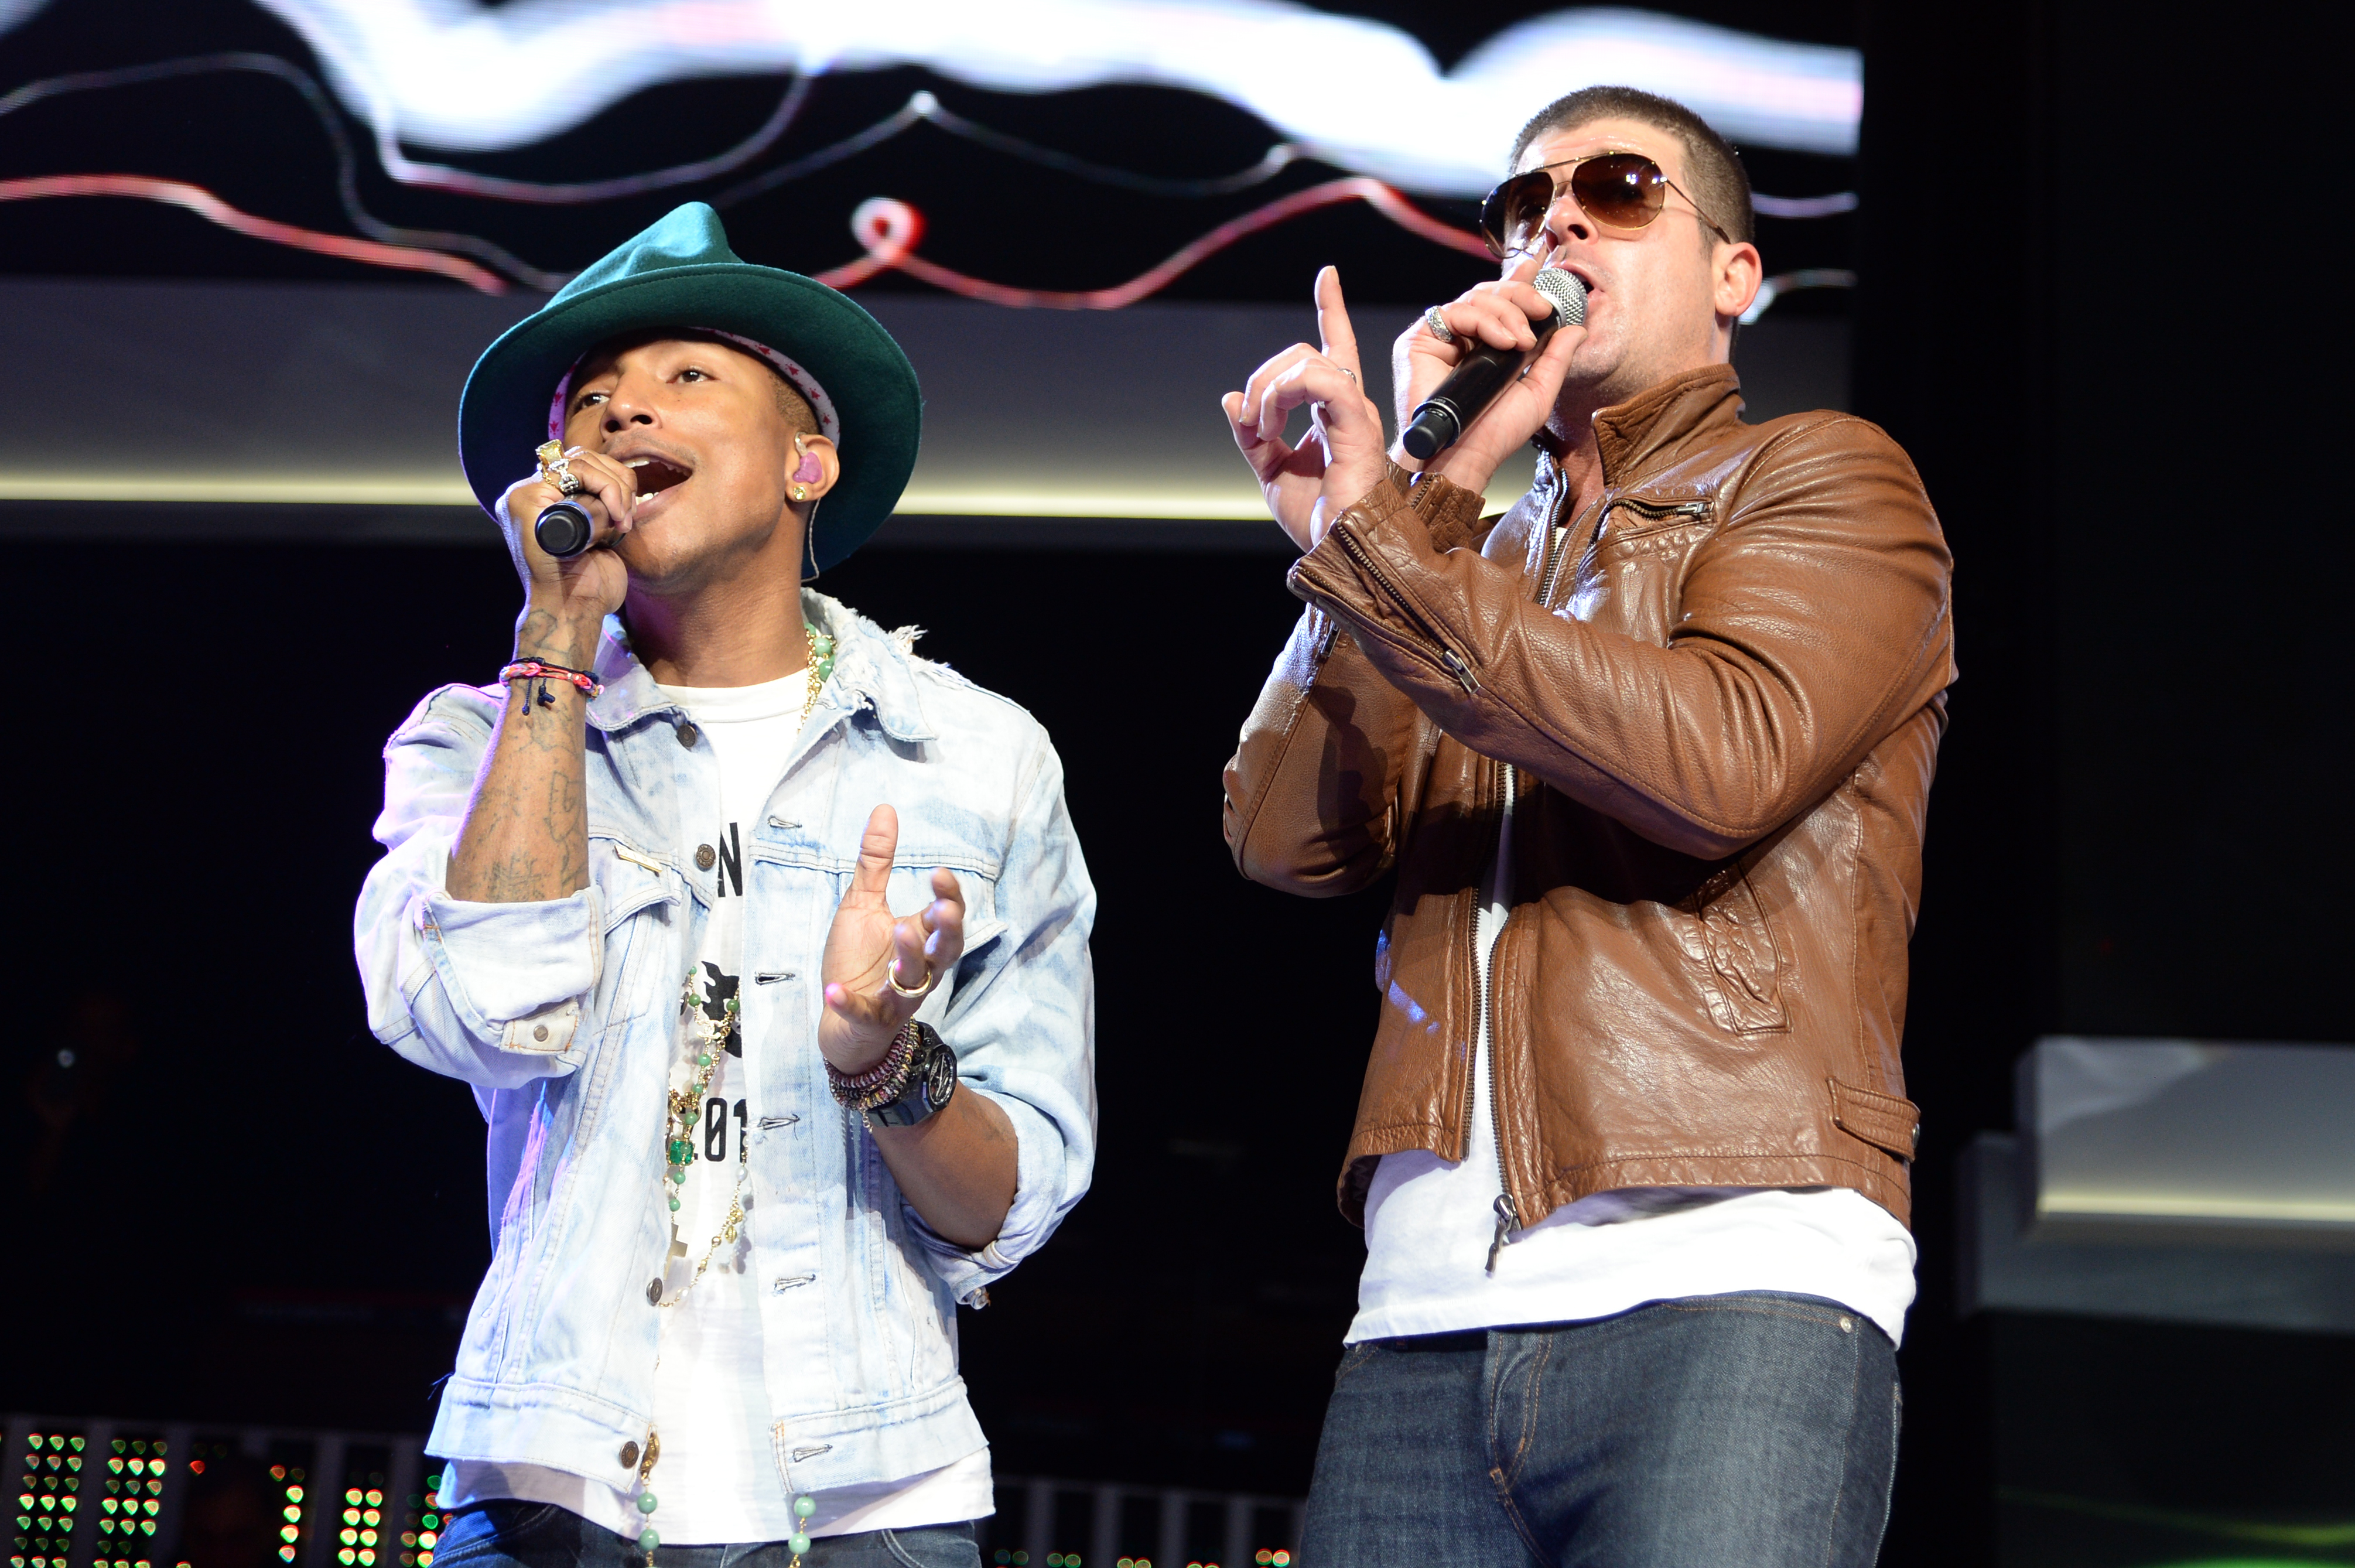 Pharrell Williams and Robin Thicke perform during the Walmart 2014 annual shareholders meeting on June 6, 2014 at Bud Walton Arena at the University of Arkansas in Fayetteville, Arkansas. (Jamie McCarthy&mdash;2014 Getty Images)